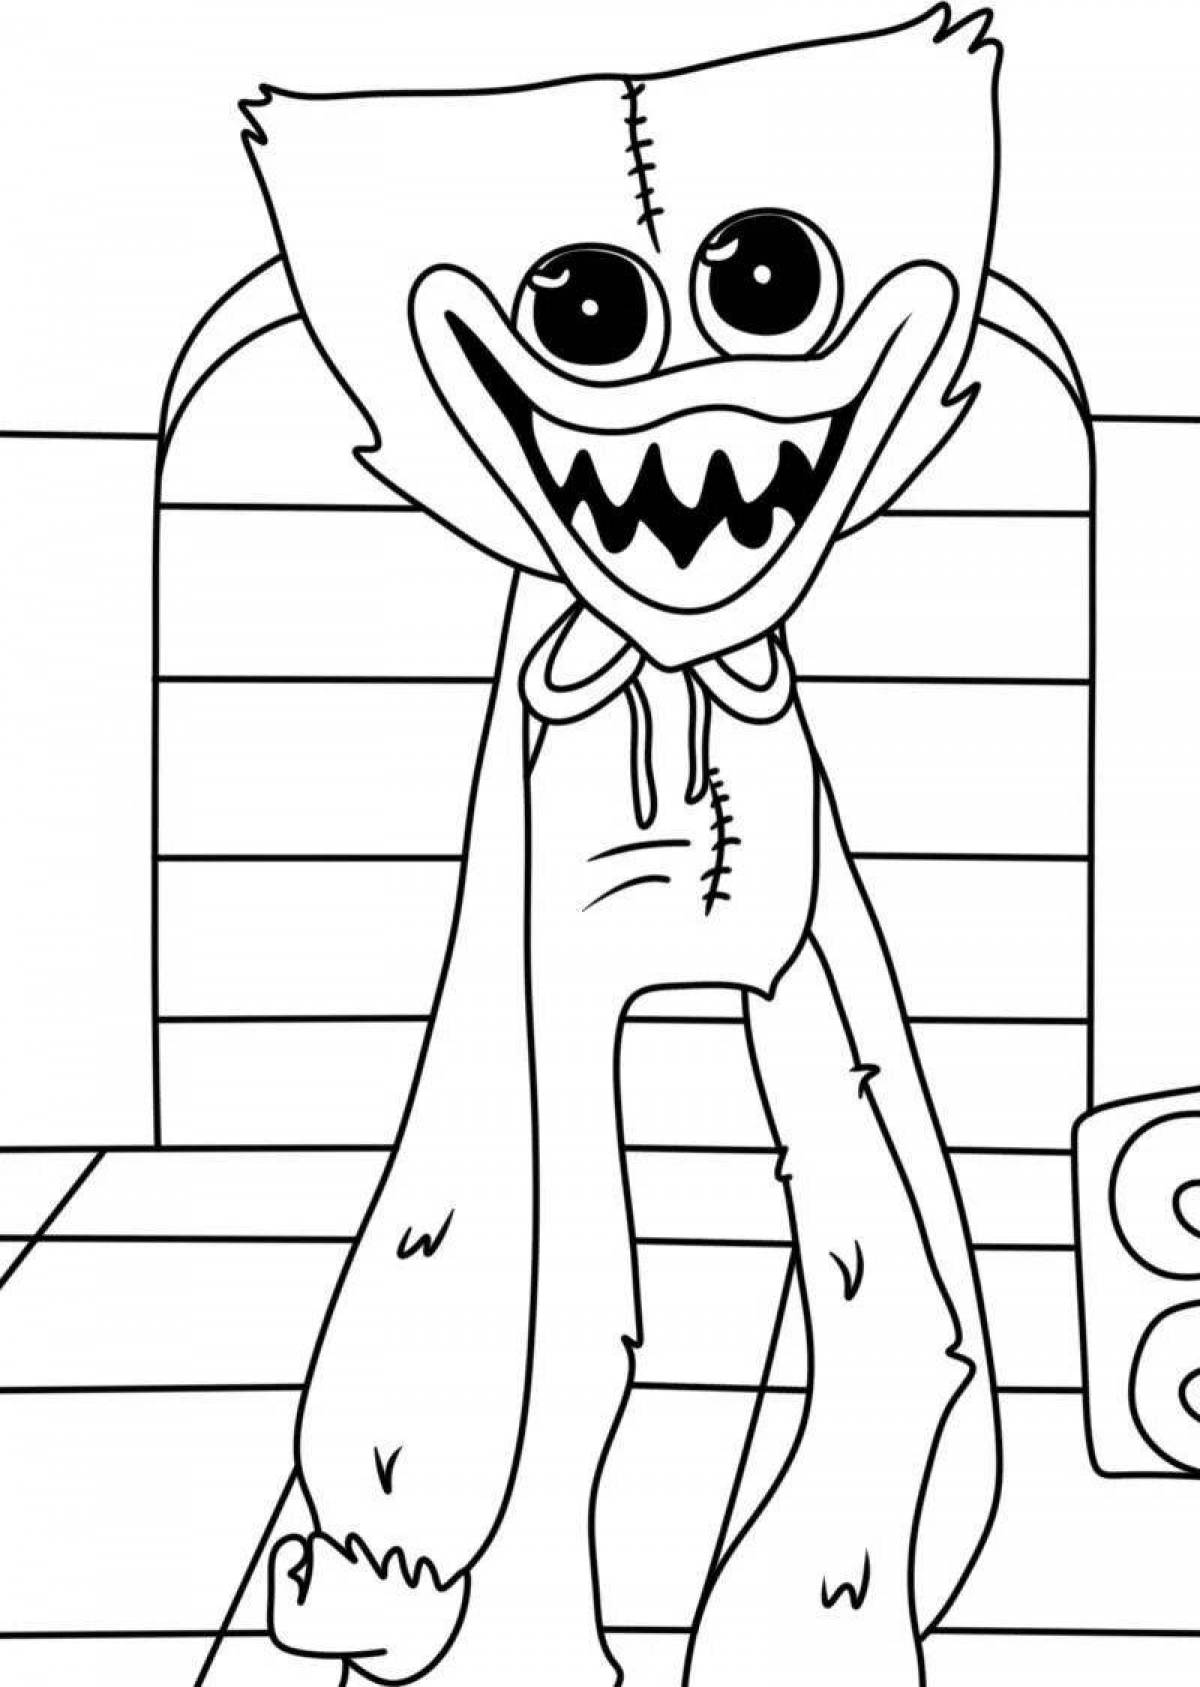 Colorful hacky bugs coloring page